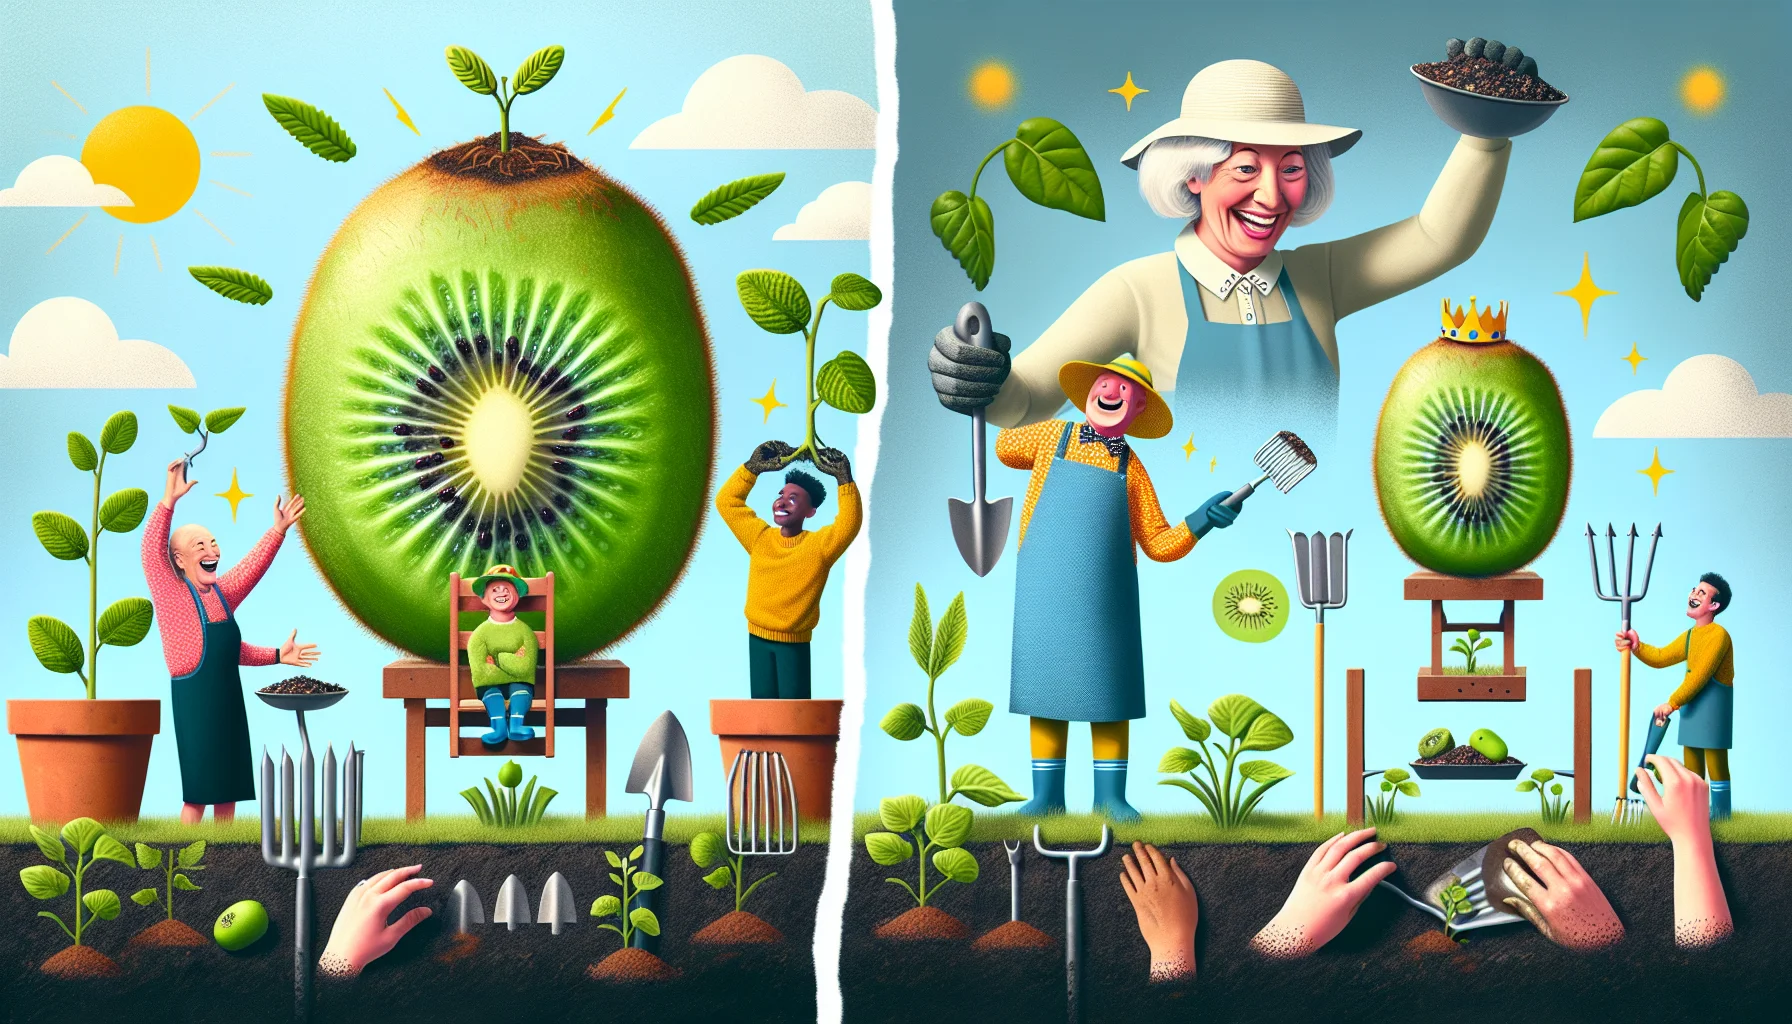 Create a humorous and eye-catching image displaying the process of growing kiwi fruit. Imagine a quirky scene where a Caucasian adult woman and a Black teenage boy are working in the garden with smiles on their faces, muddy hands, and sun hats on their head. A kiwi fruit appears to be sitting on top of a tiny throne with a sign that reads 'King of the Garden', while the two gardeners are hilariously bowing to it. Make sure to also visually represent the different stages of kiwi growth from seedling to fruit. The idea should inspire people to enjoy the fun aspect of gardening.